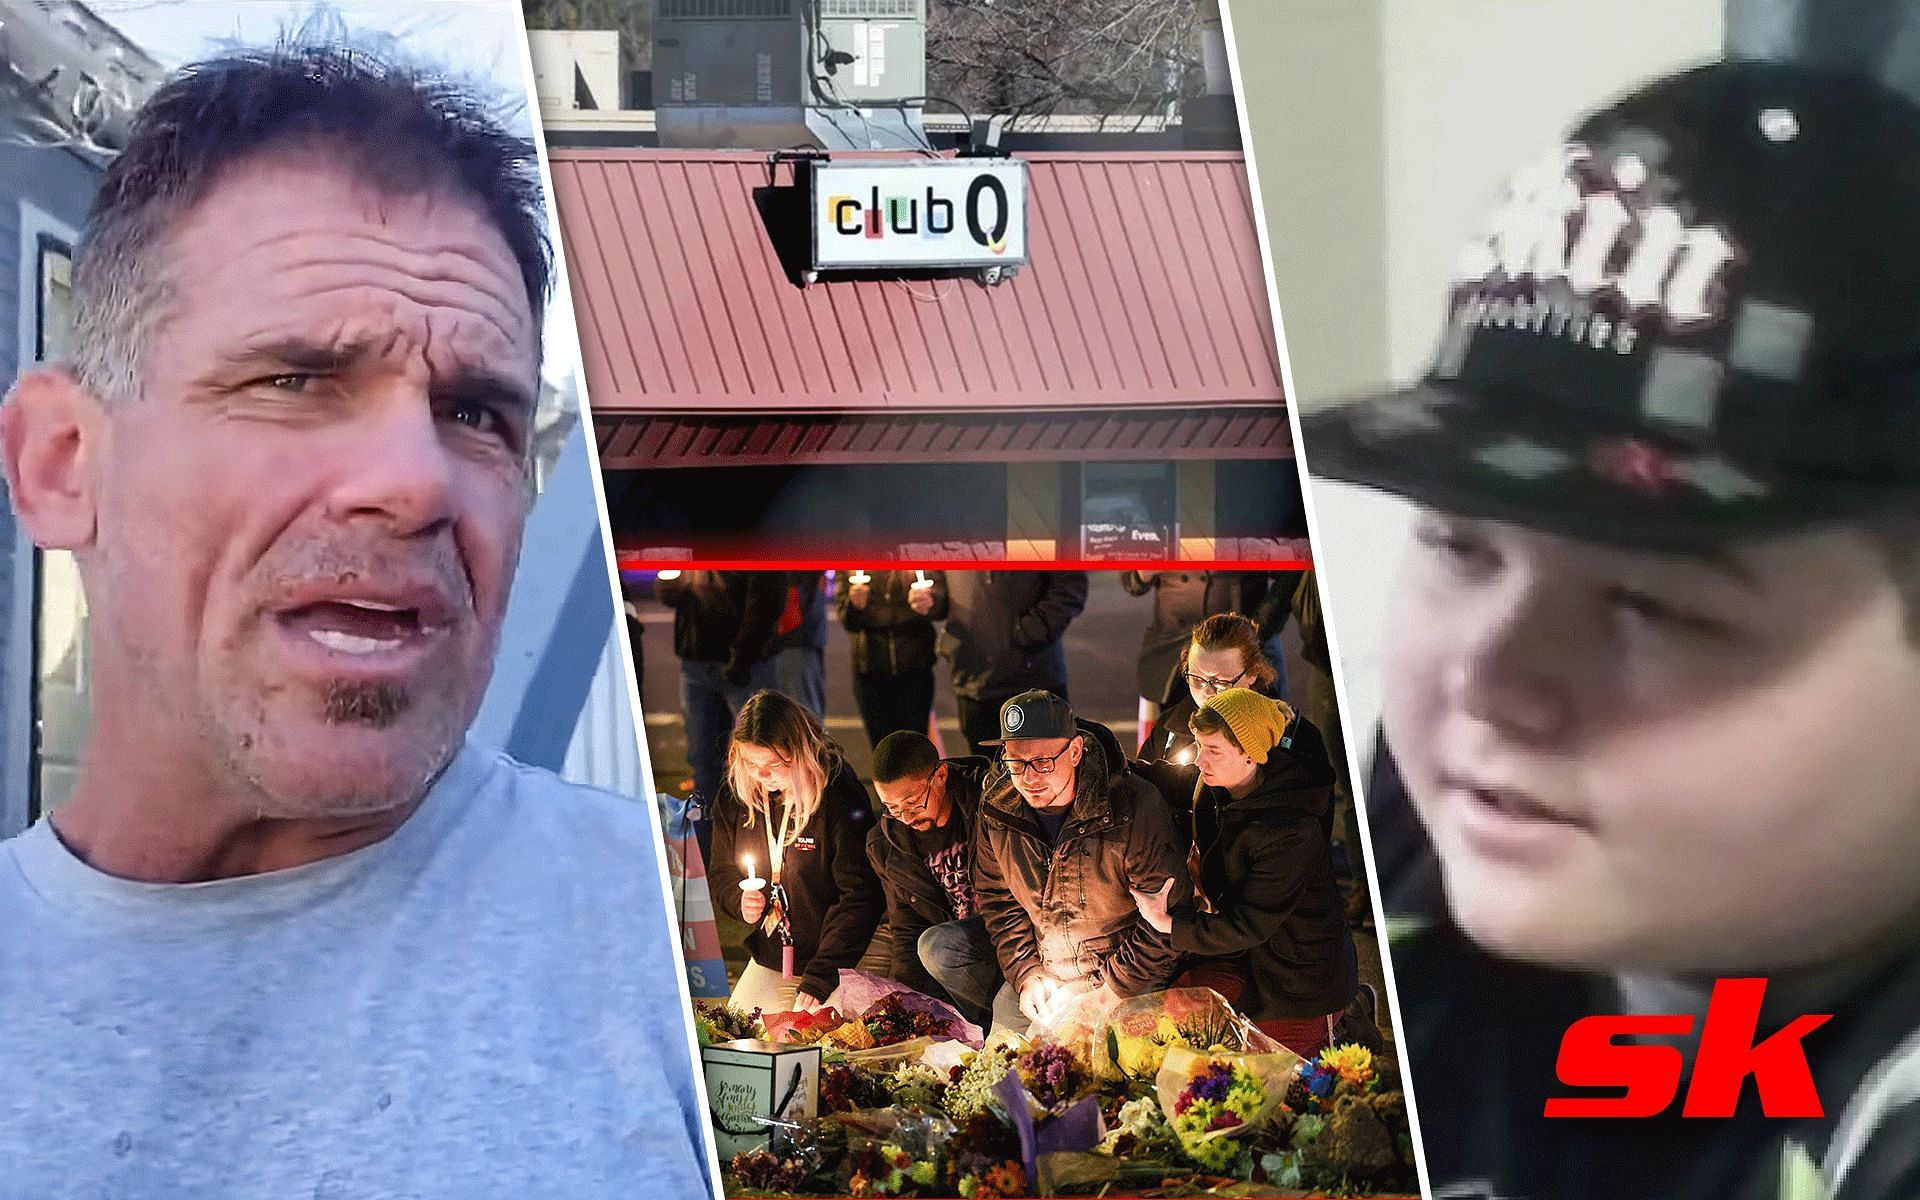 Aaron Brink, father of the Colorado Springs Club Q shooter, shares his immediate reaction upon hearing his son had shot up an LGBTQ bar [Images via: CBS 8 San Diego | YouTube]